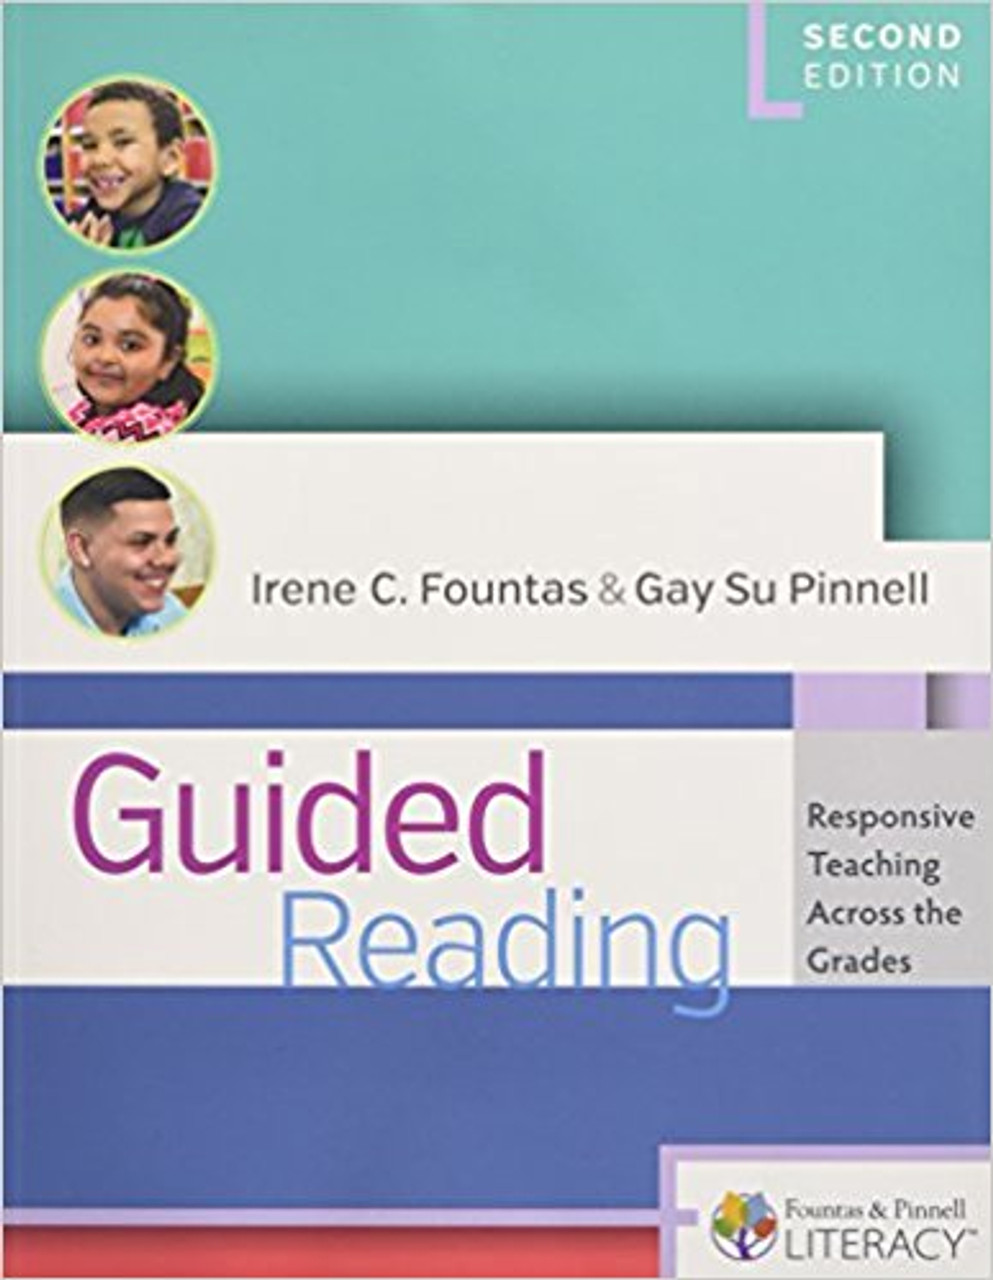 Guided Reading: Responsive Teaching Across the Grades by Irene Fountas